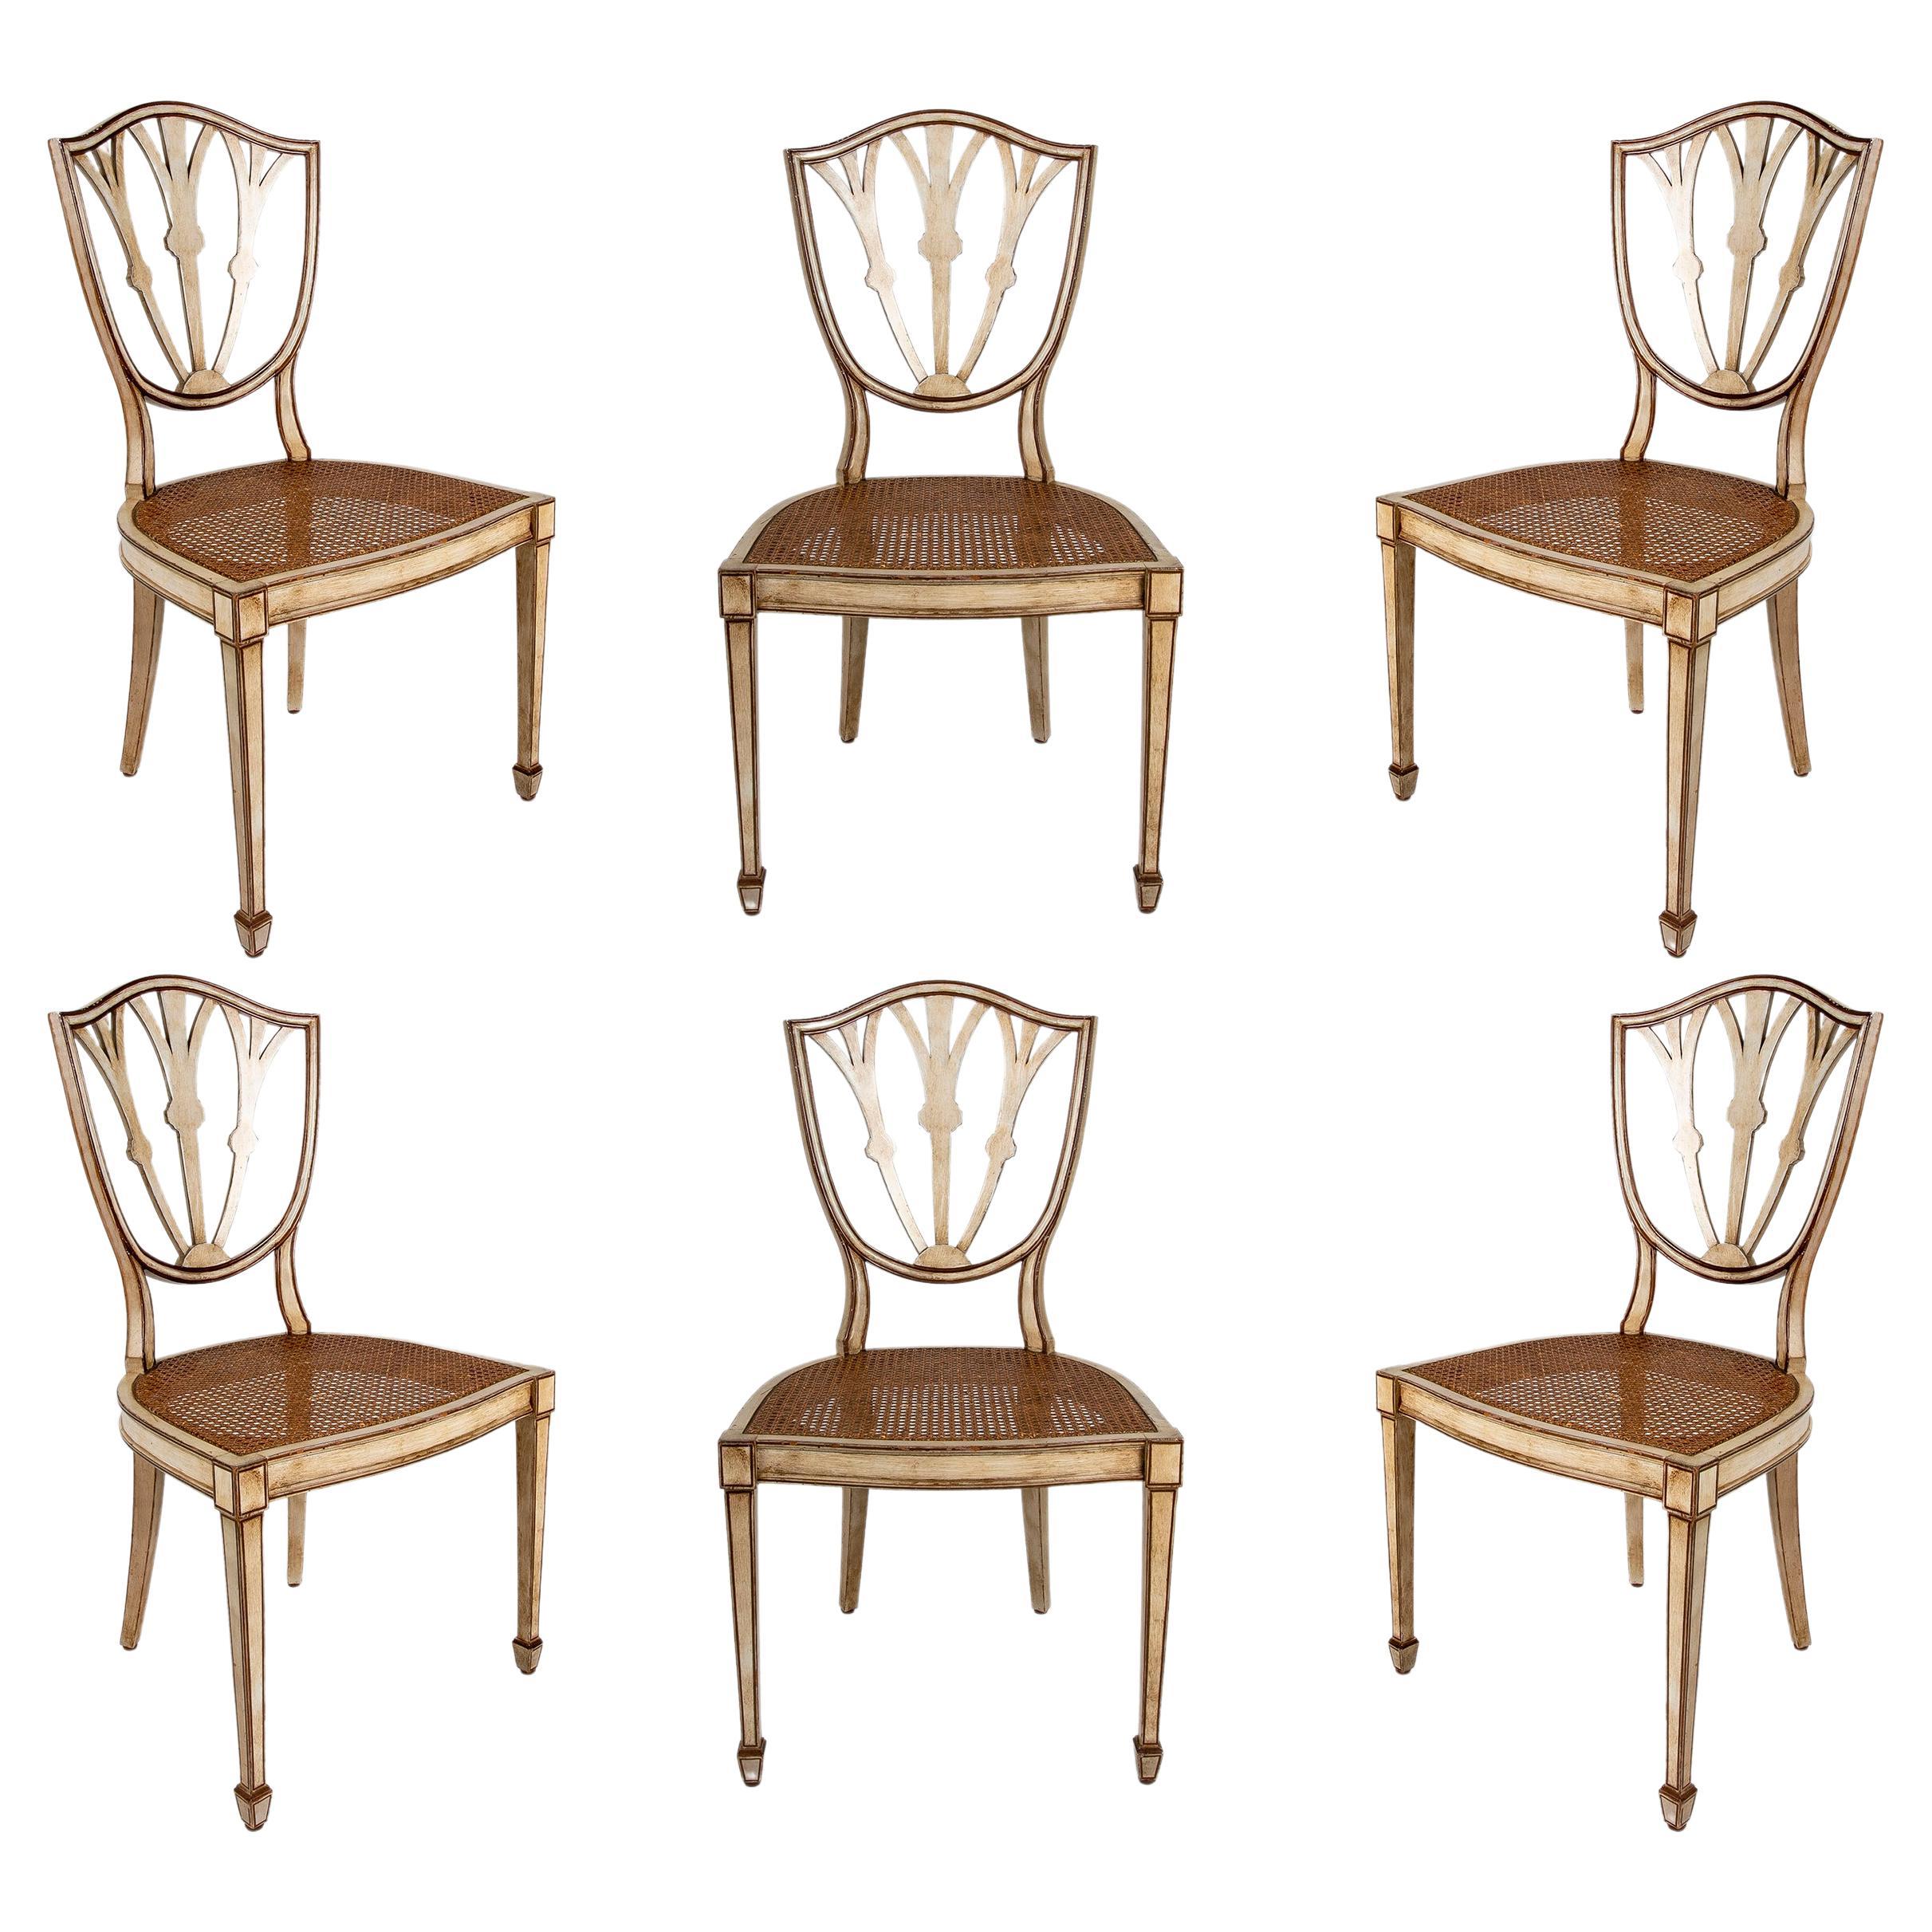 Set of six Wooden Chairs with Slatted Seats For Sale